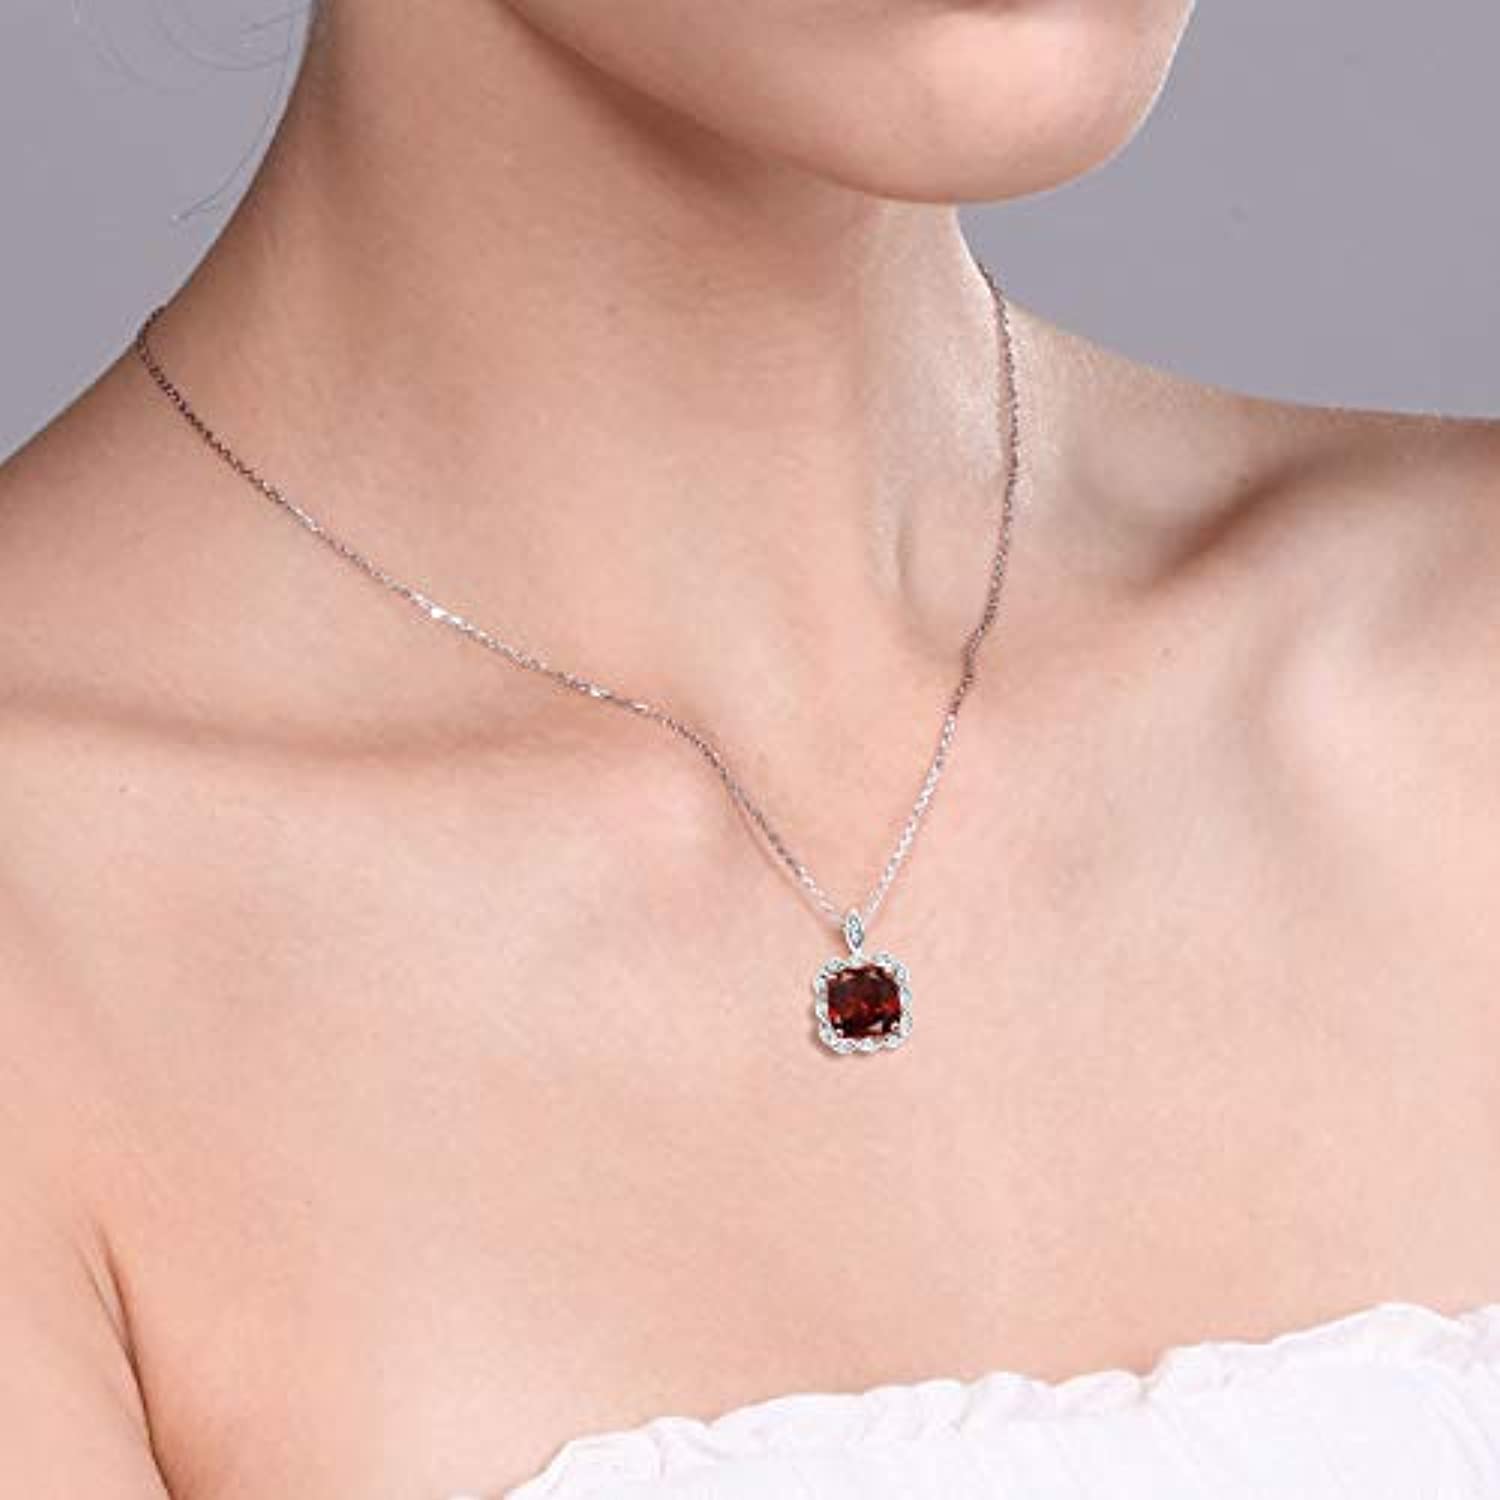 925 Sterling Silver Red Garnet Pendant Necklace For Women (2.91 Ct Cushion Cut, Gemstone Birthstone with 18 Inch Silver Chain)